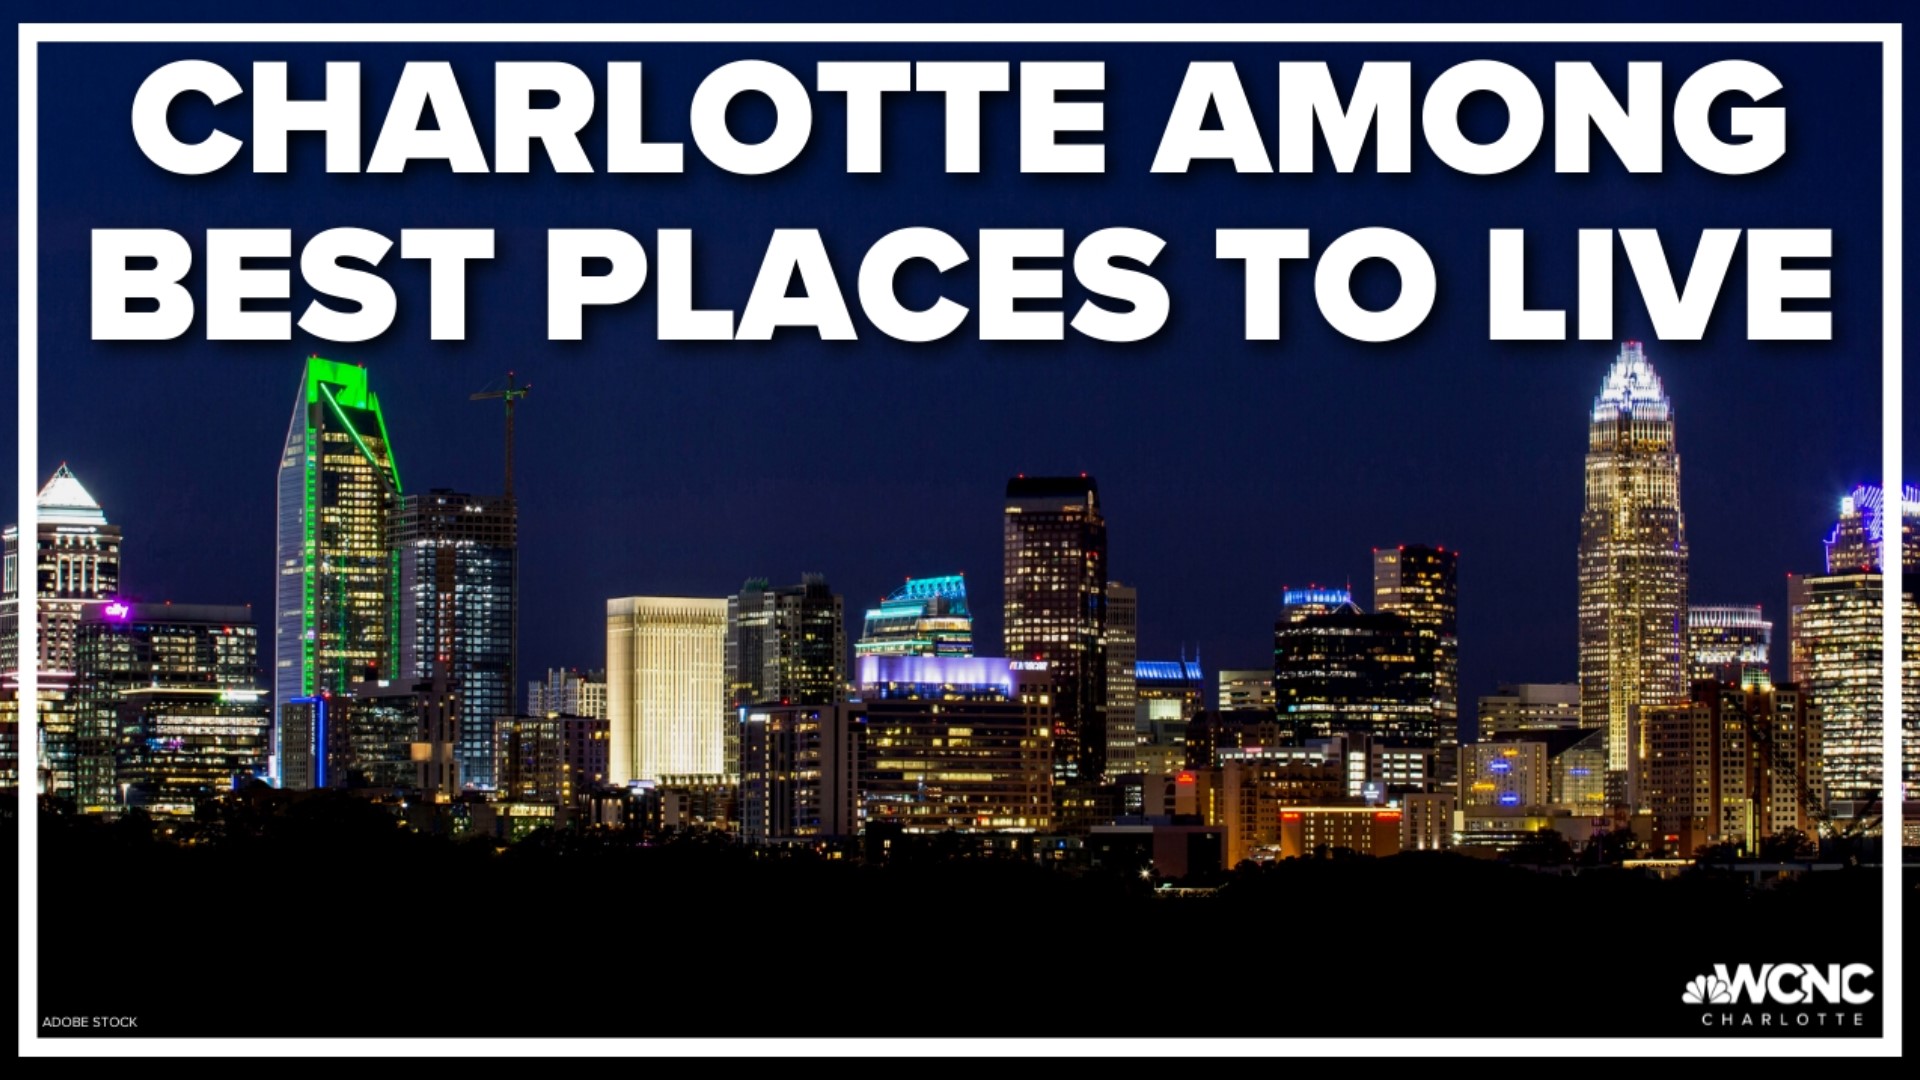 When it comes to the best places to live, Charlotte is pretty high on the list.